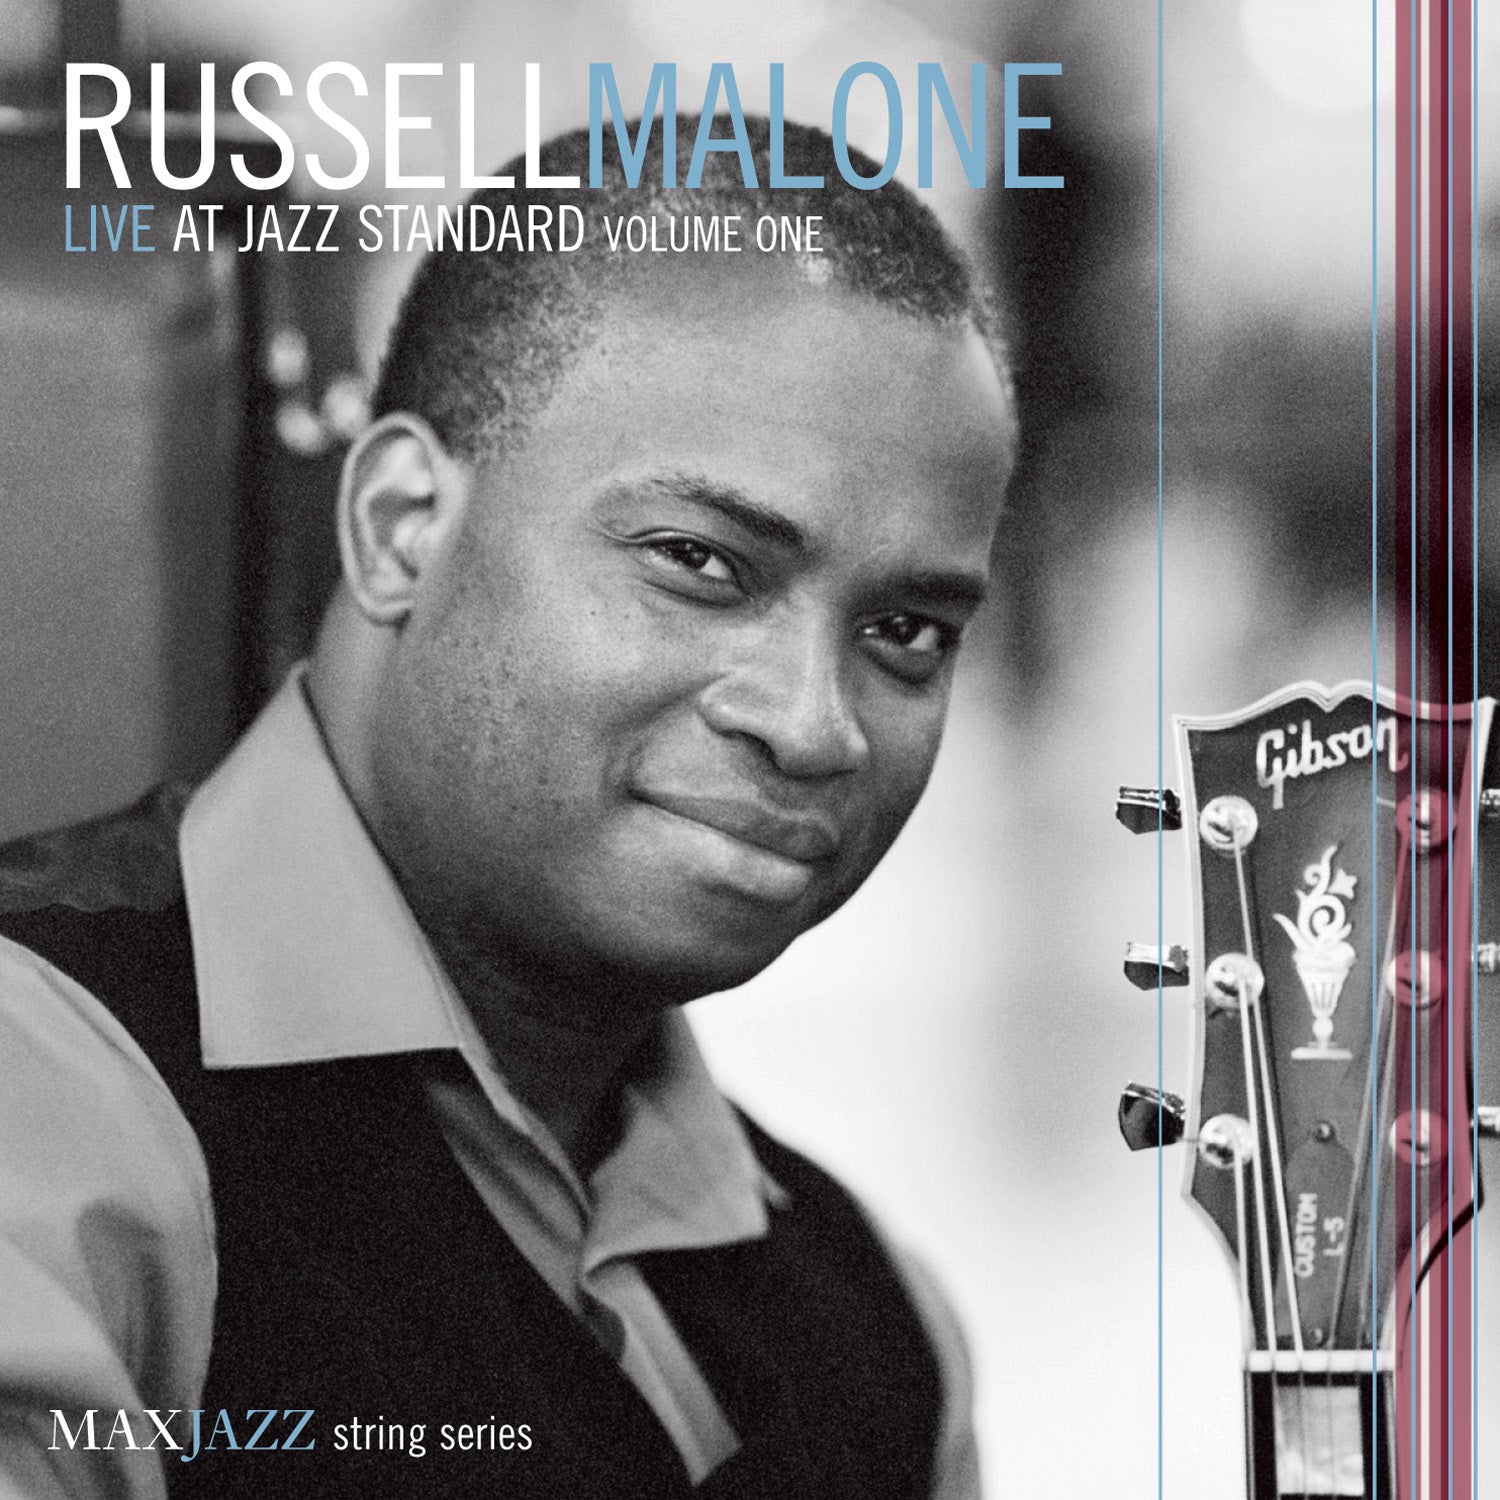 Russell Malone - Live at Jazz Standard Volume One